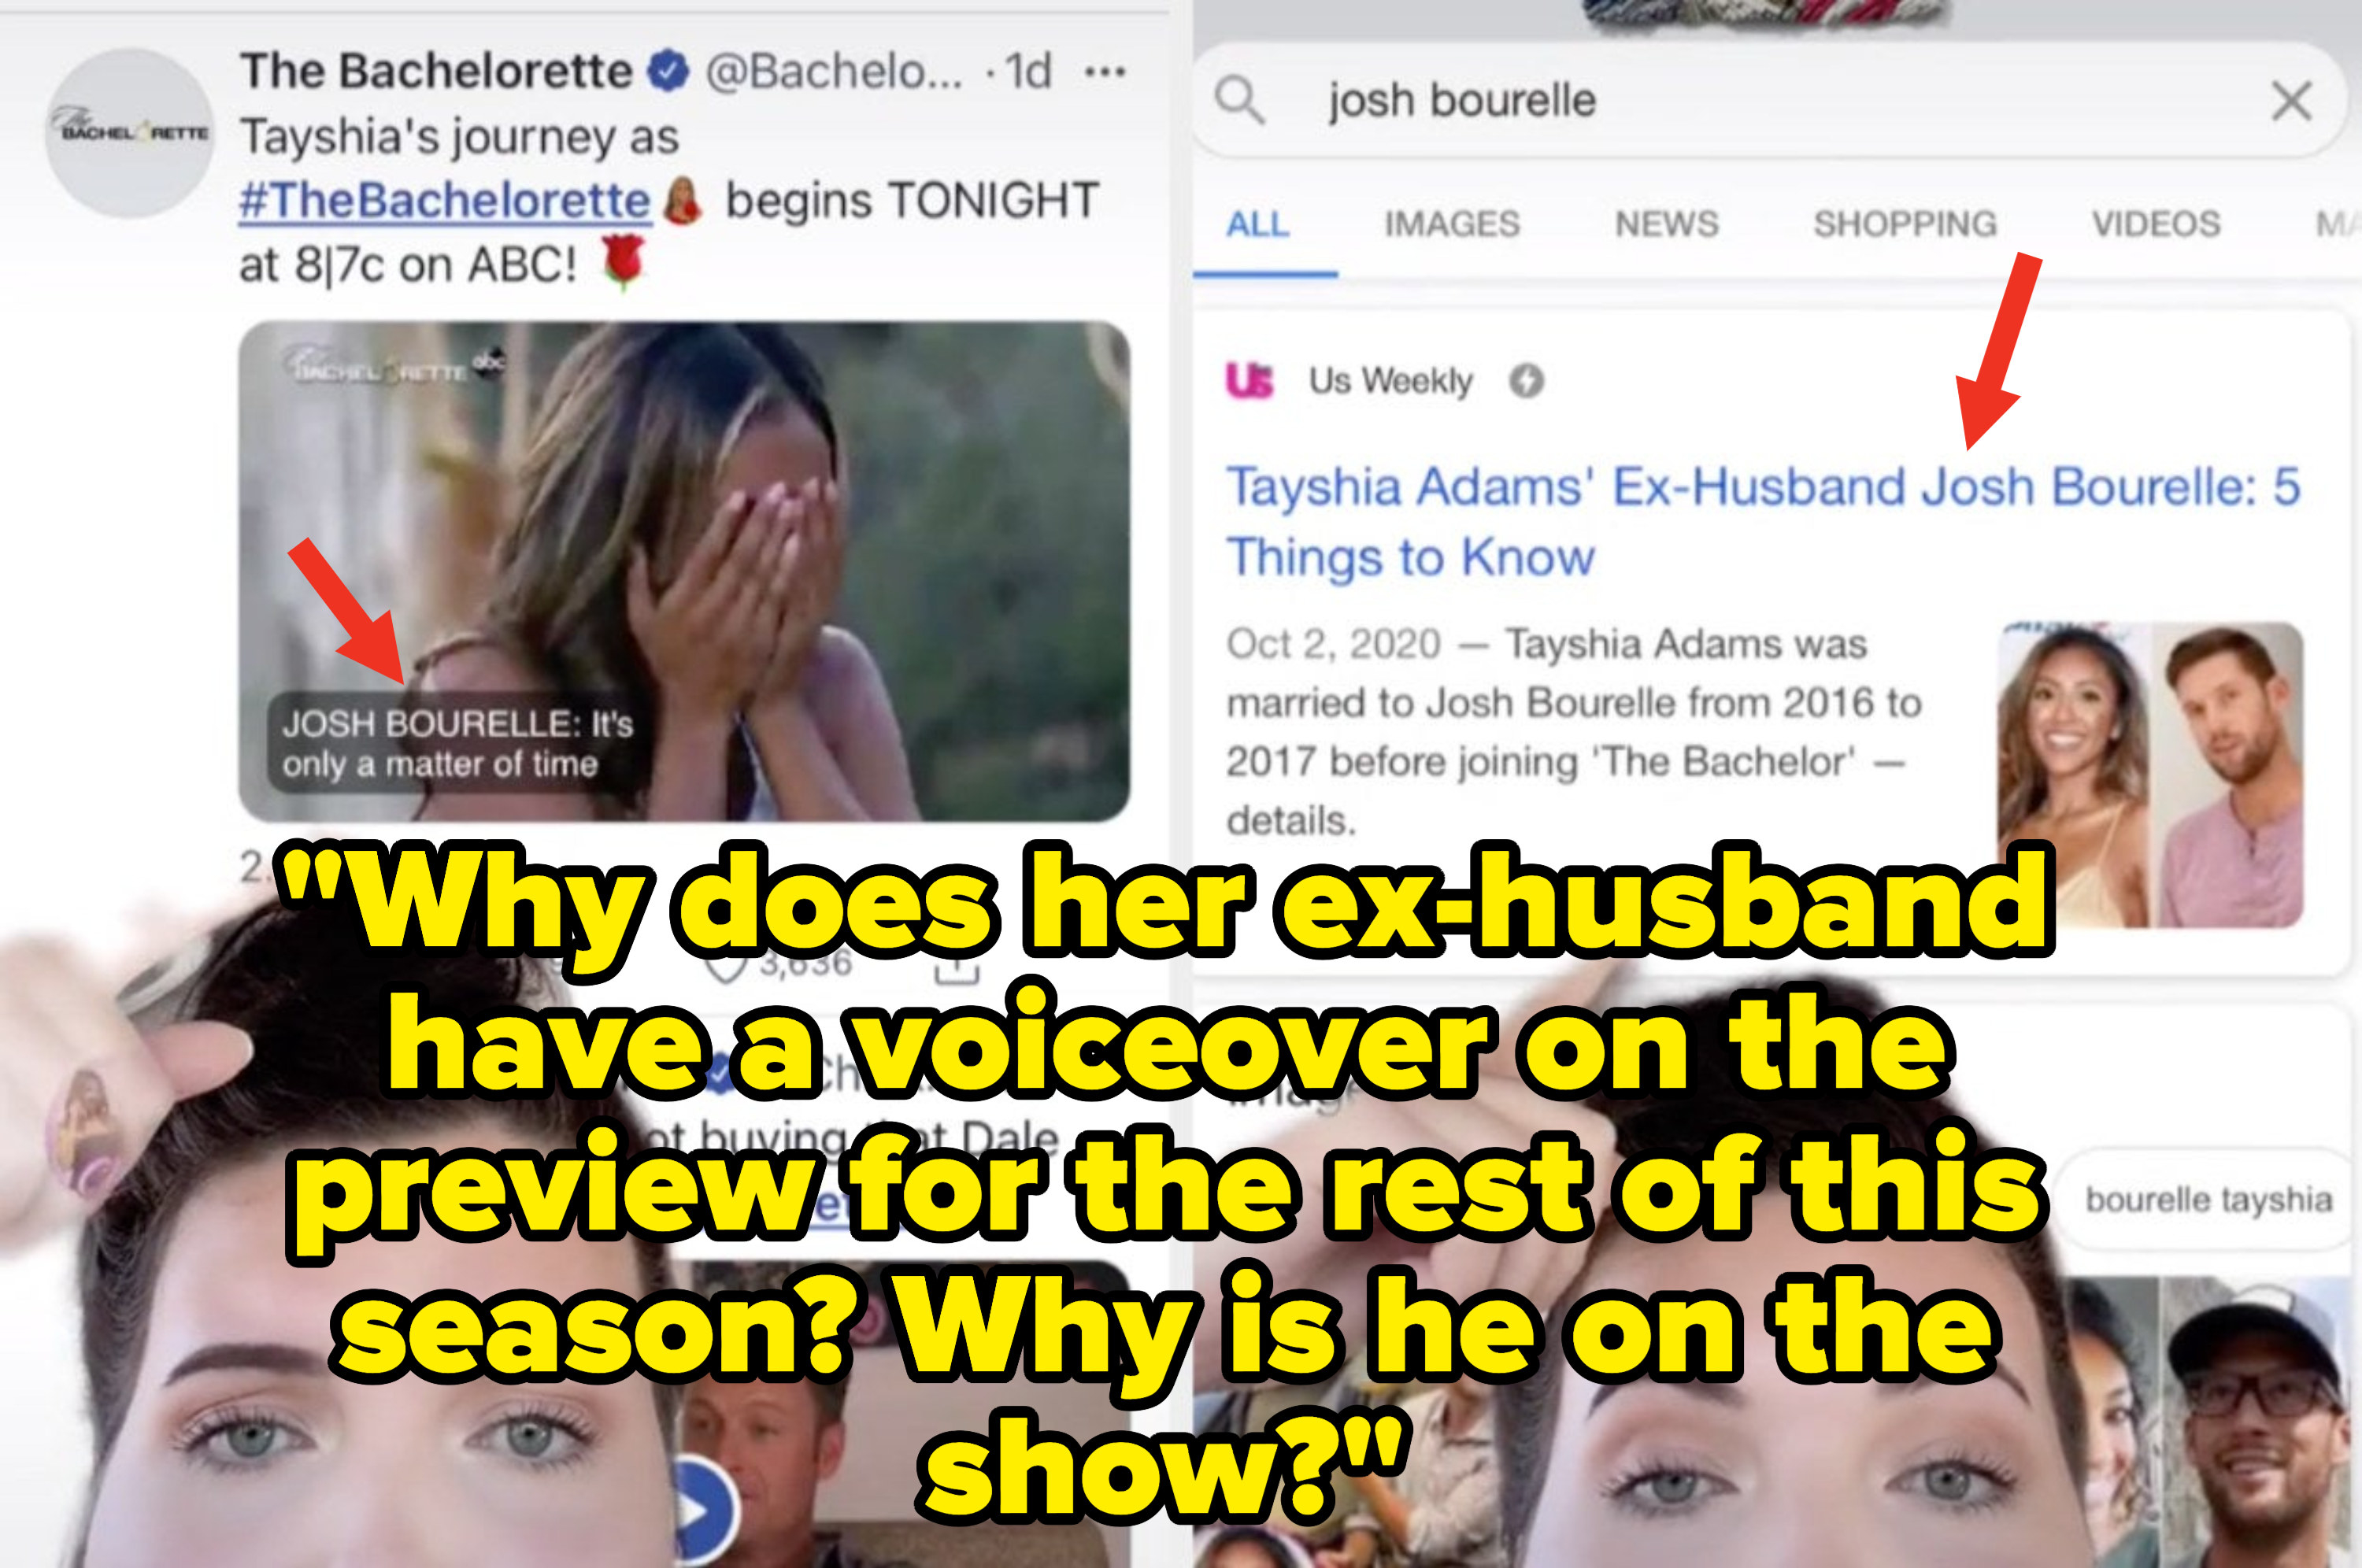 The TikToker asks, &quot;&quot;Why does her ex-husband have a voiceover on the preview for the rest of this season? Why is he on the show?&quot;